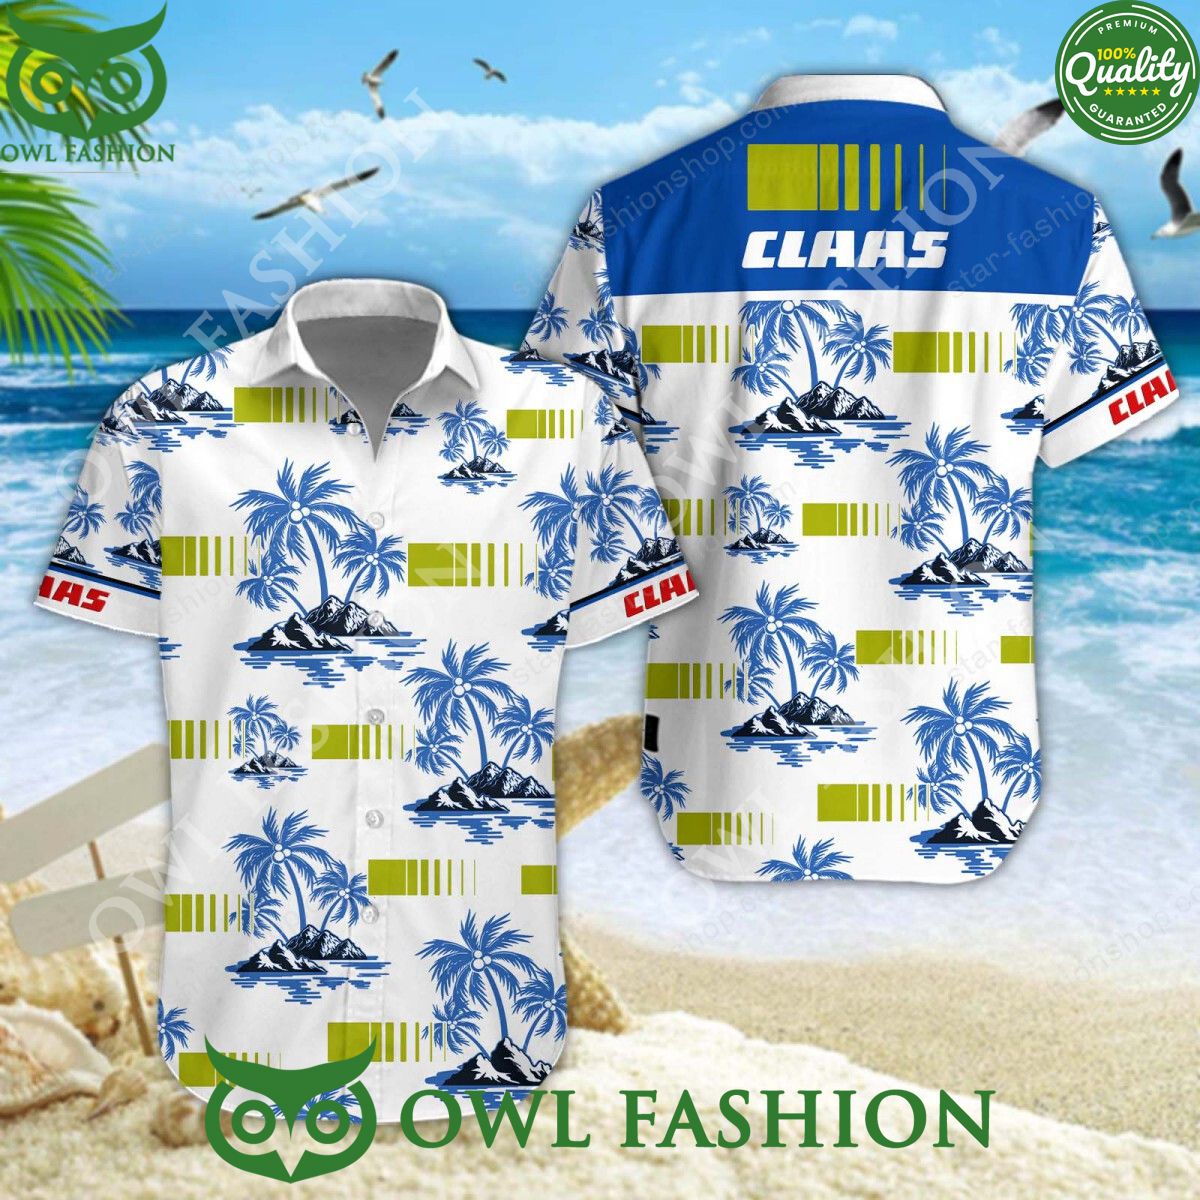 claas germany agricultural machinery manufacturer hawaiian shirt and short 1 YYKMm.jpg